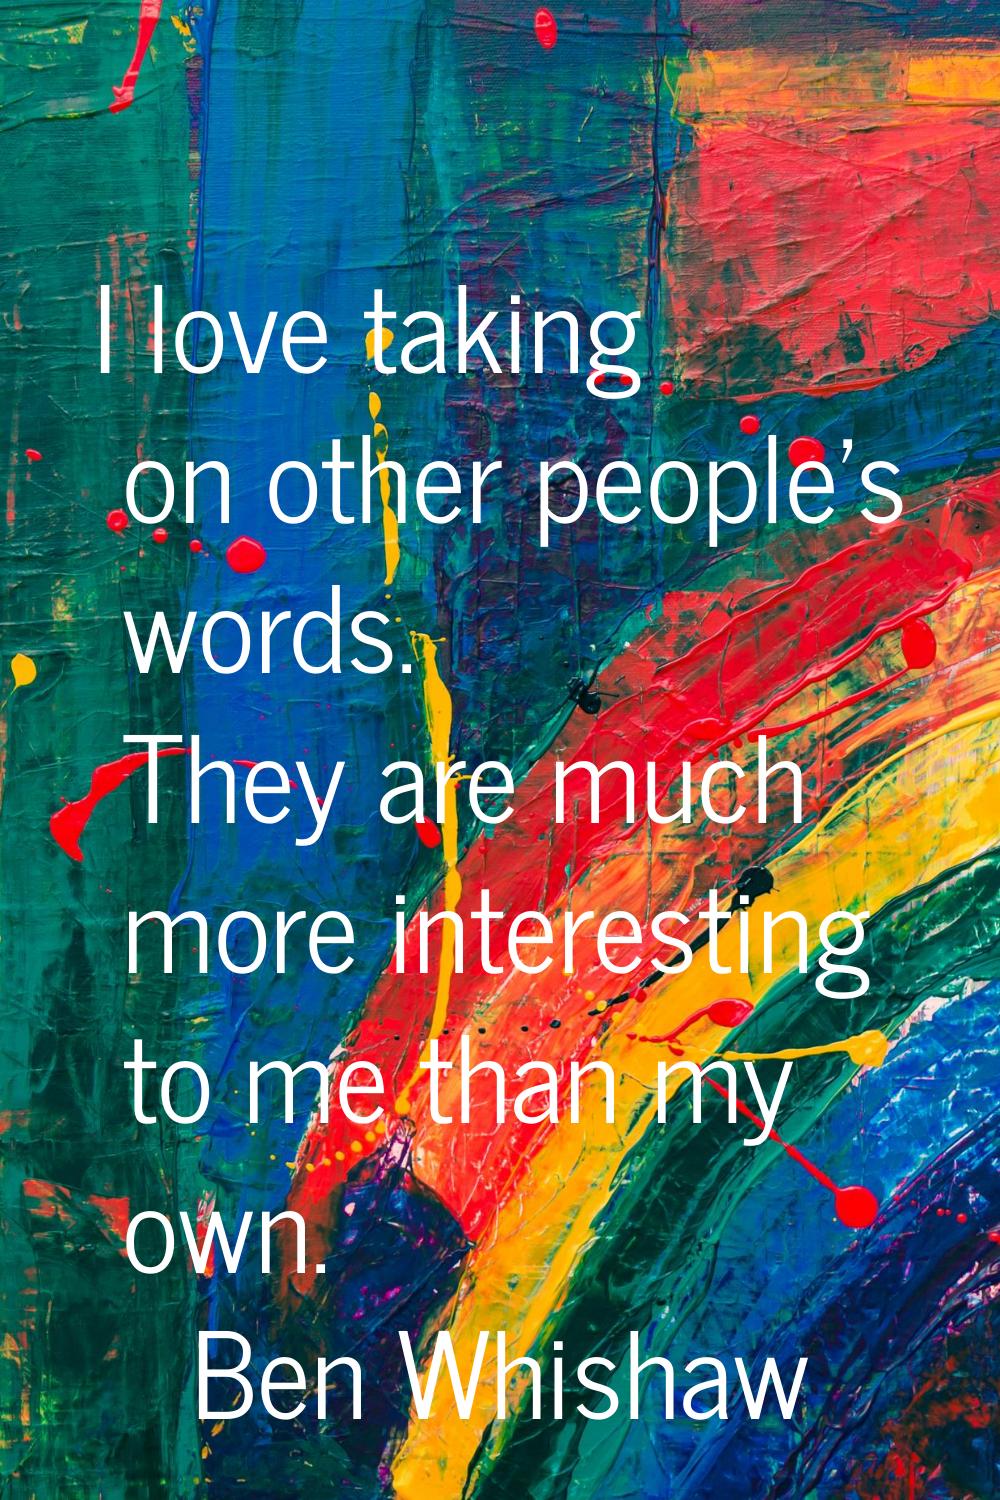 I love taking on other people's words. They are much more interesting to me than my own.